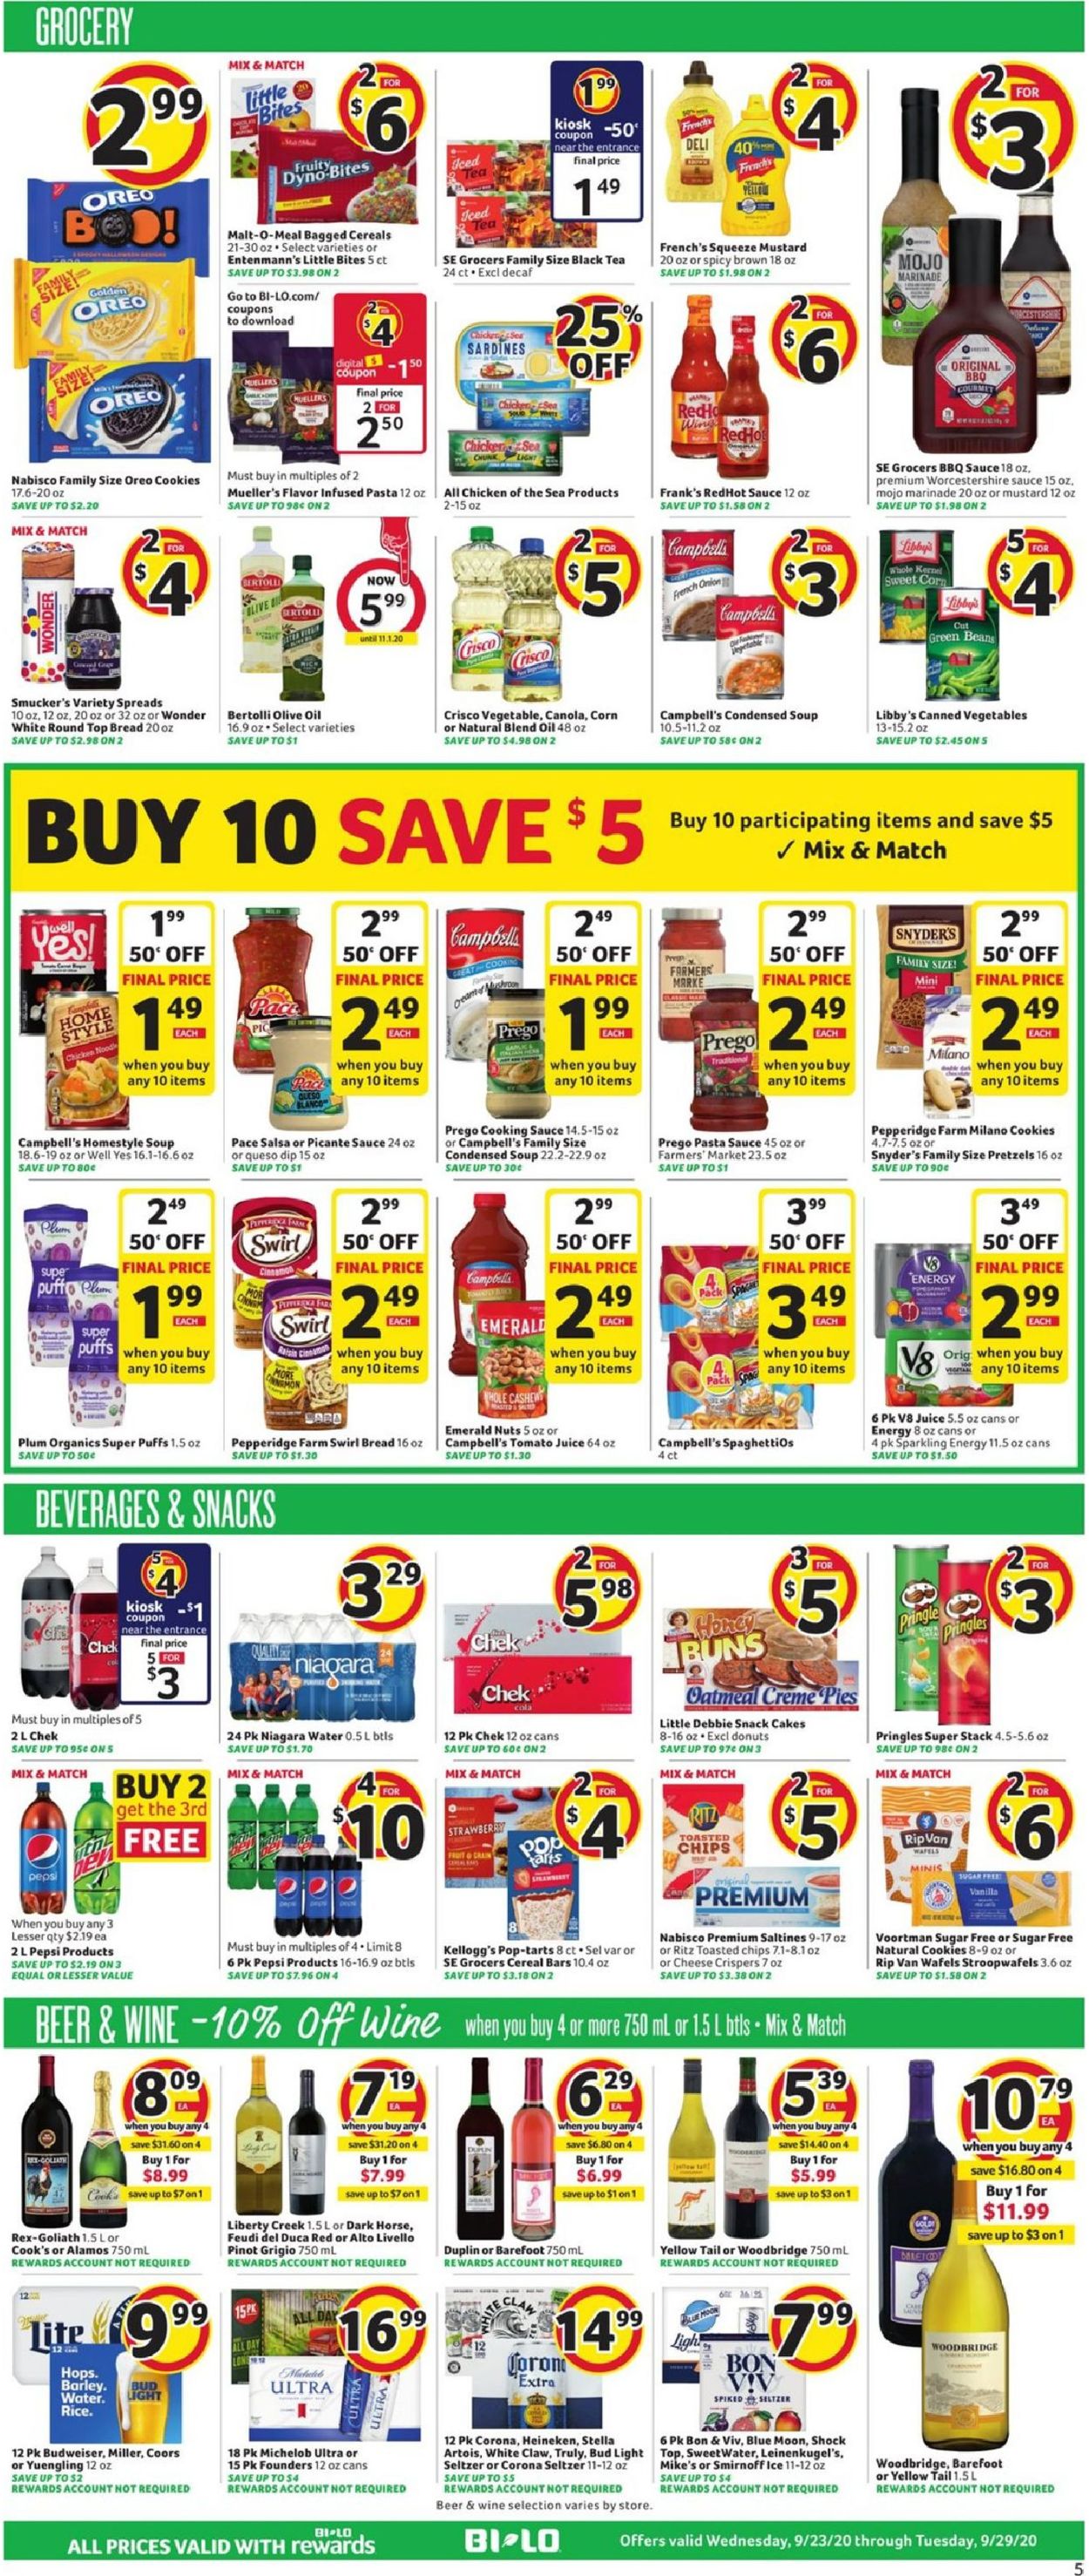 Catalogue BI-LO from 09/23/2020